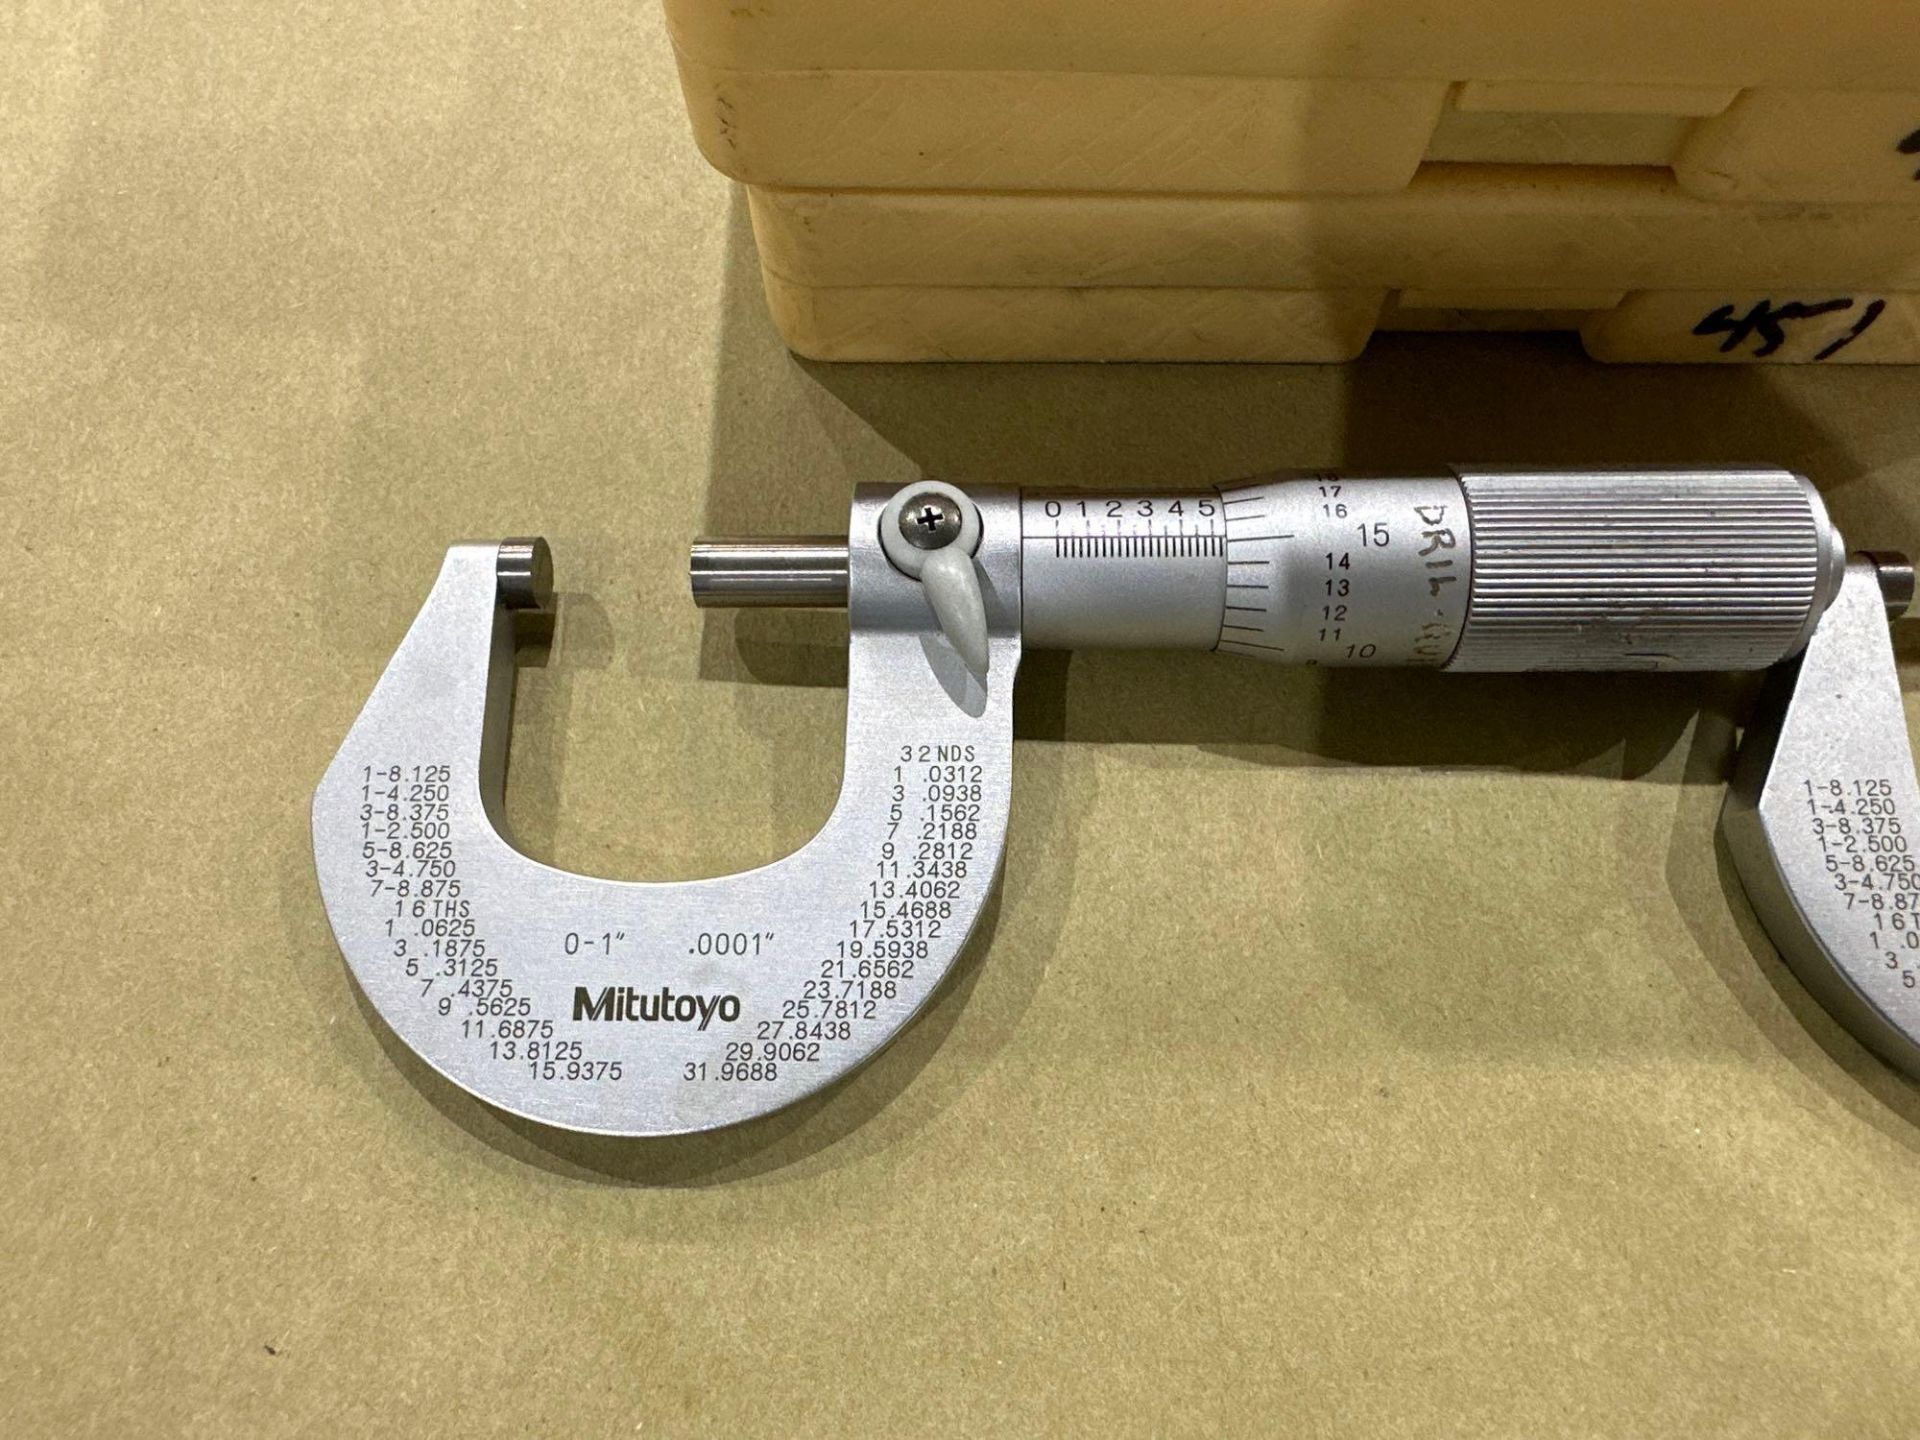 Lot of 12: Mitutoyo Mechanical OD Micrometer M225-1”, 0-1” Range, .0001” Graduation in plastic boxes - Image 6 of 7